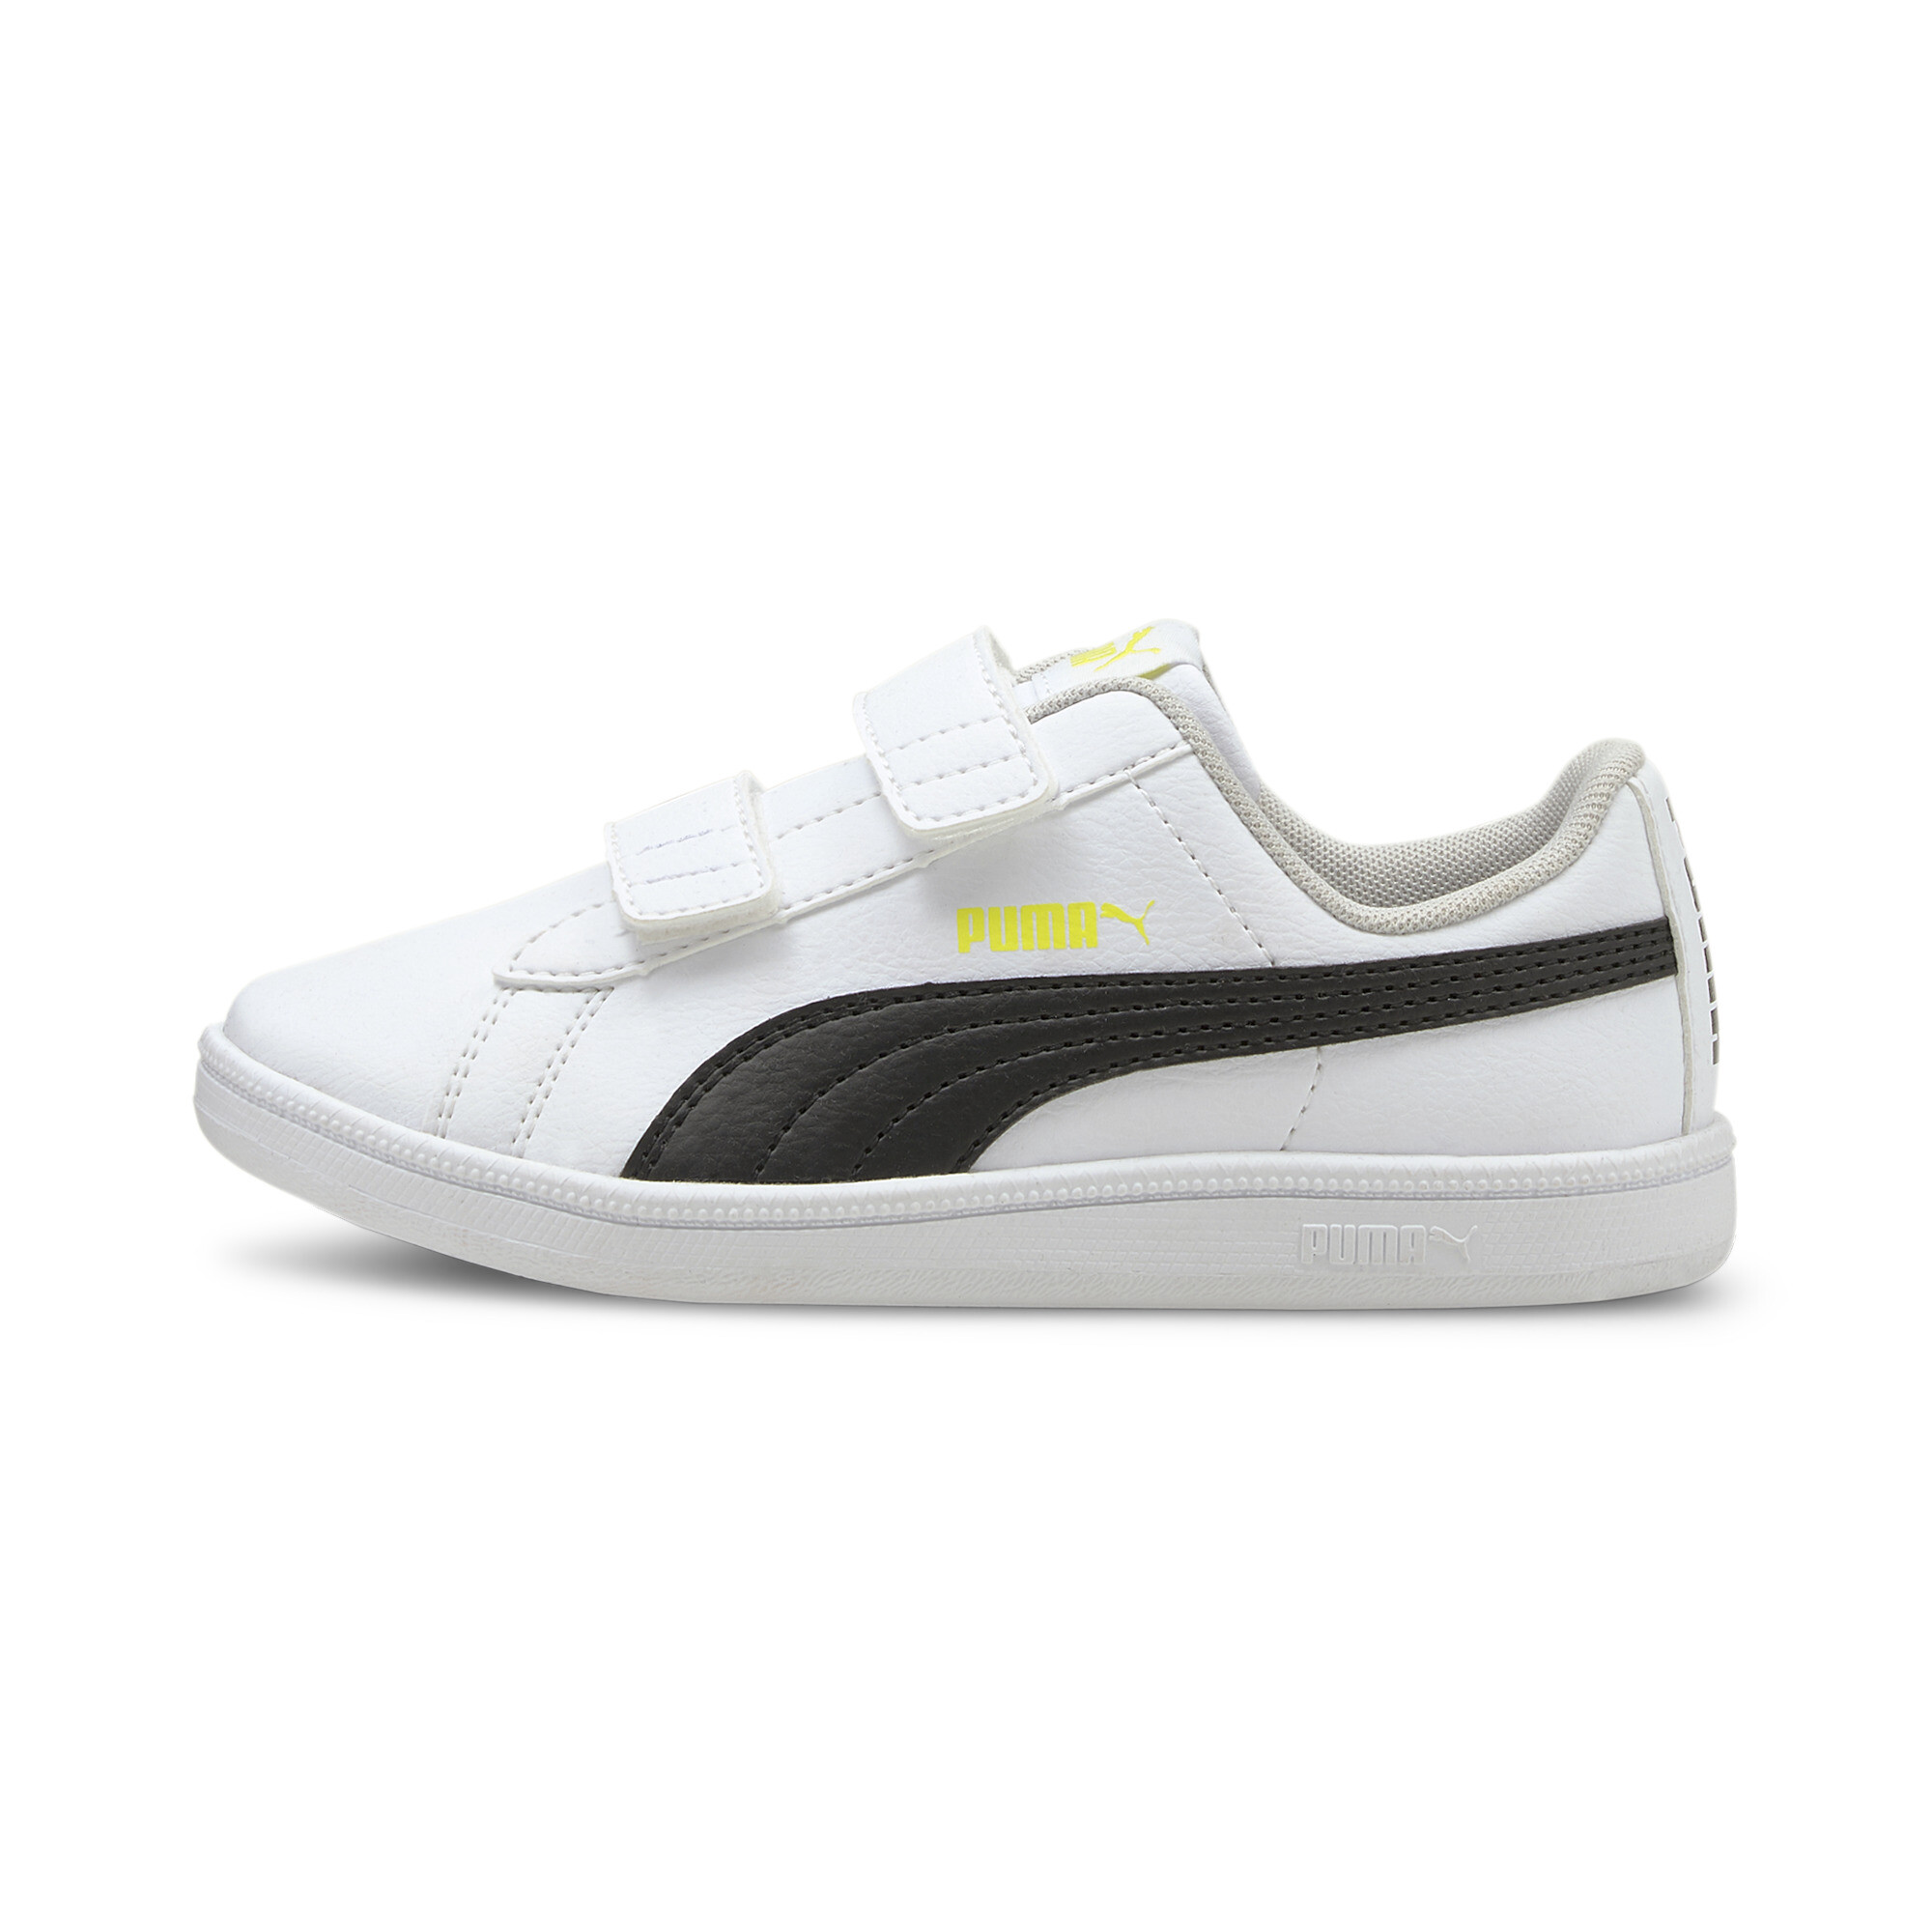 UP V Kids' Trainers | Online Exclusives | PUMA